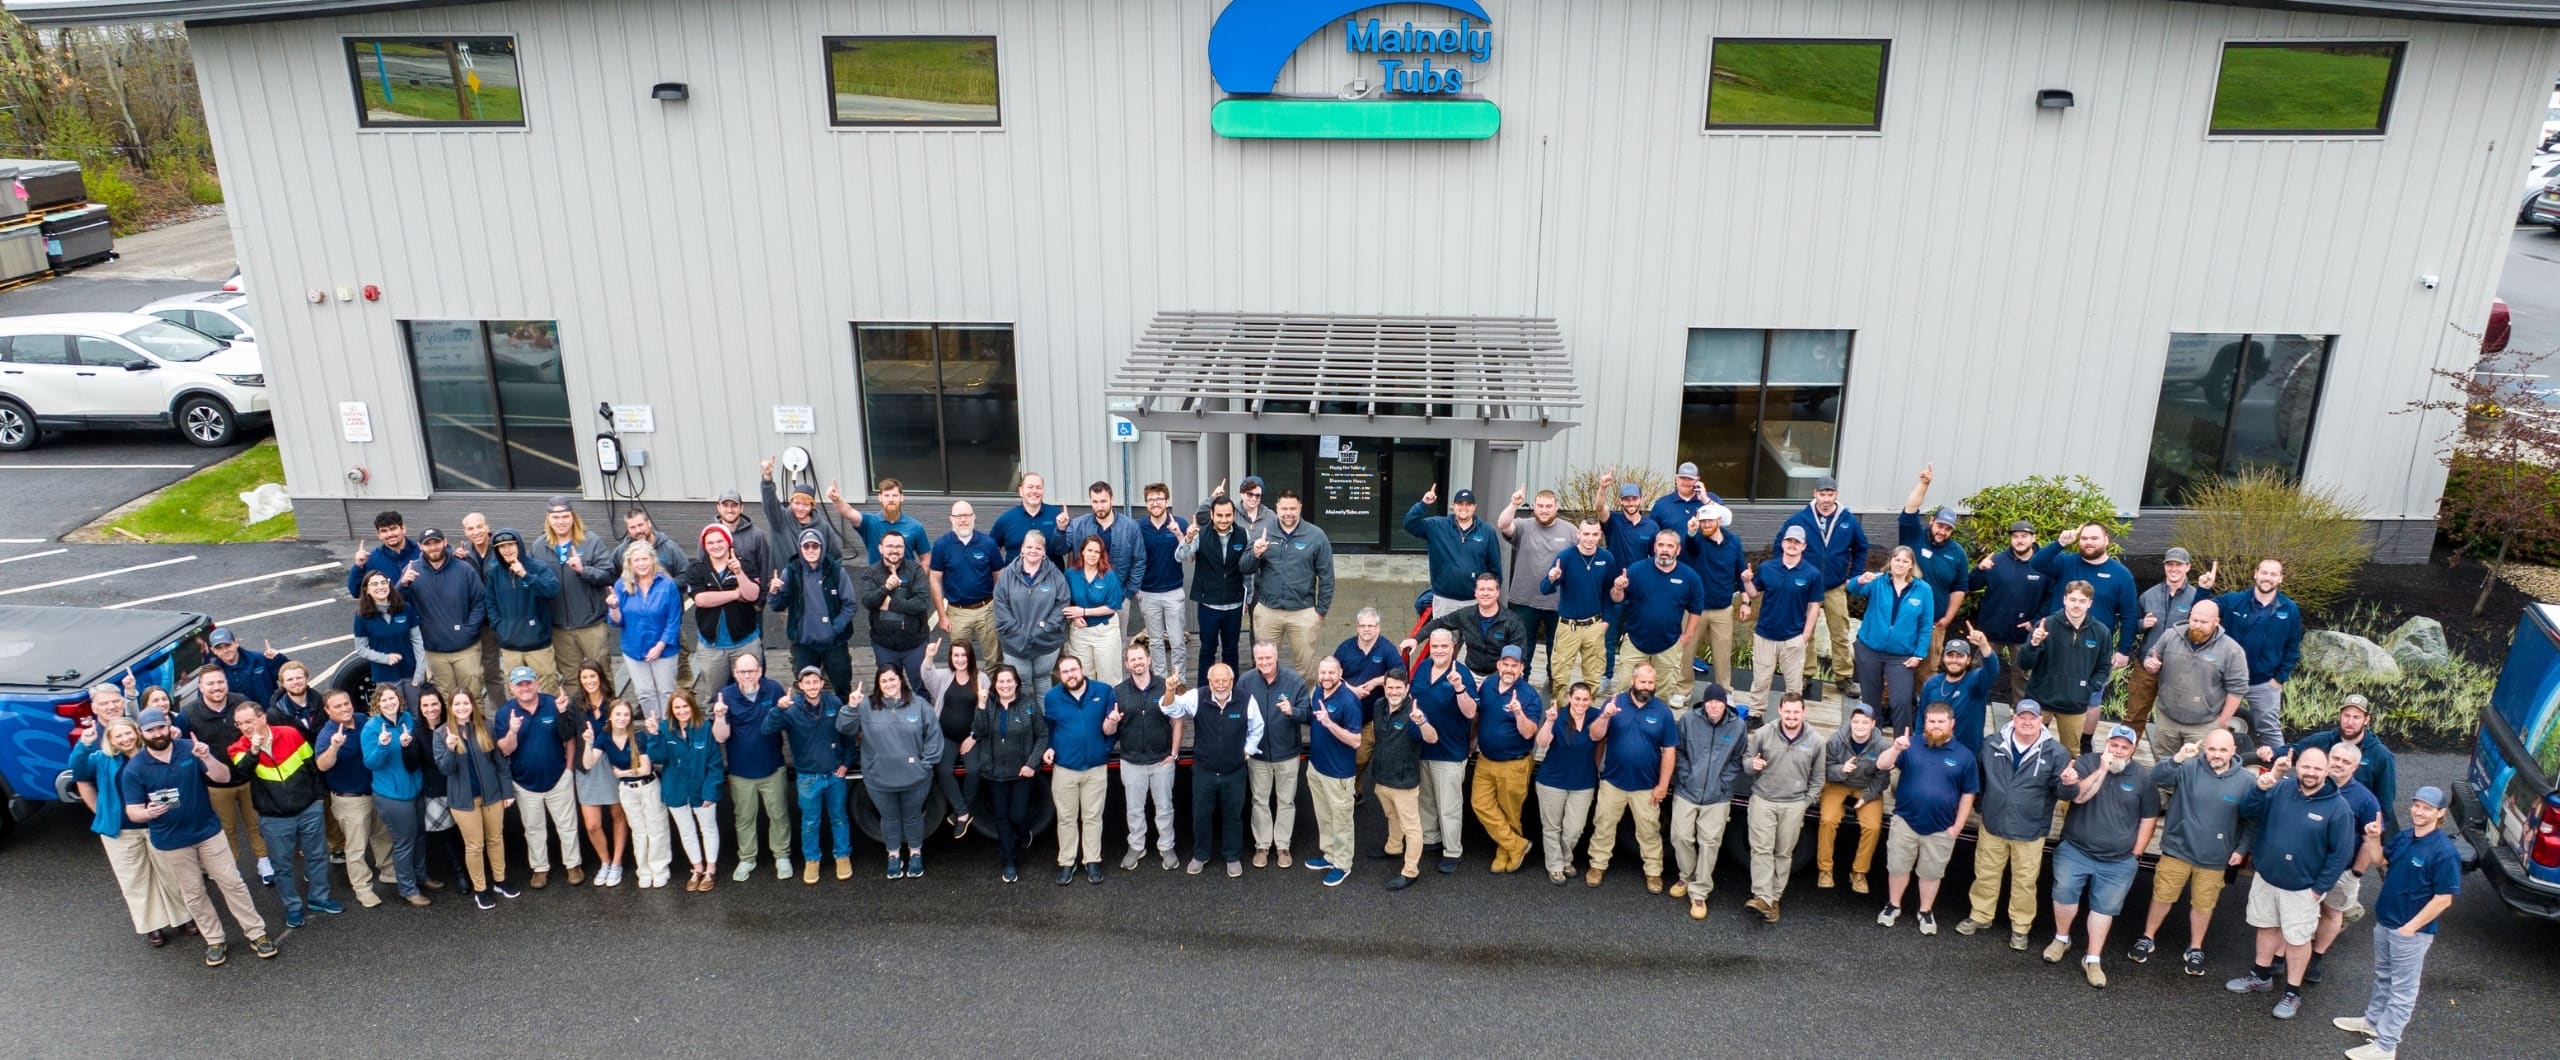 Mainely Tubs Company Photo at 2023 All Hands Meeting